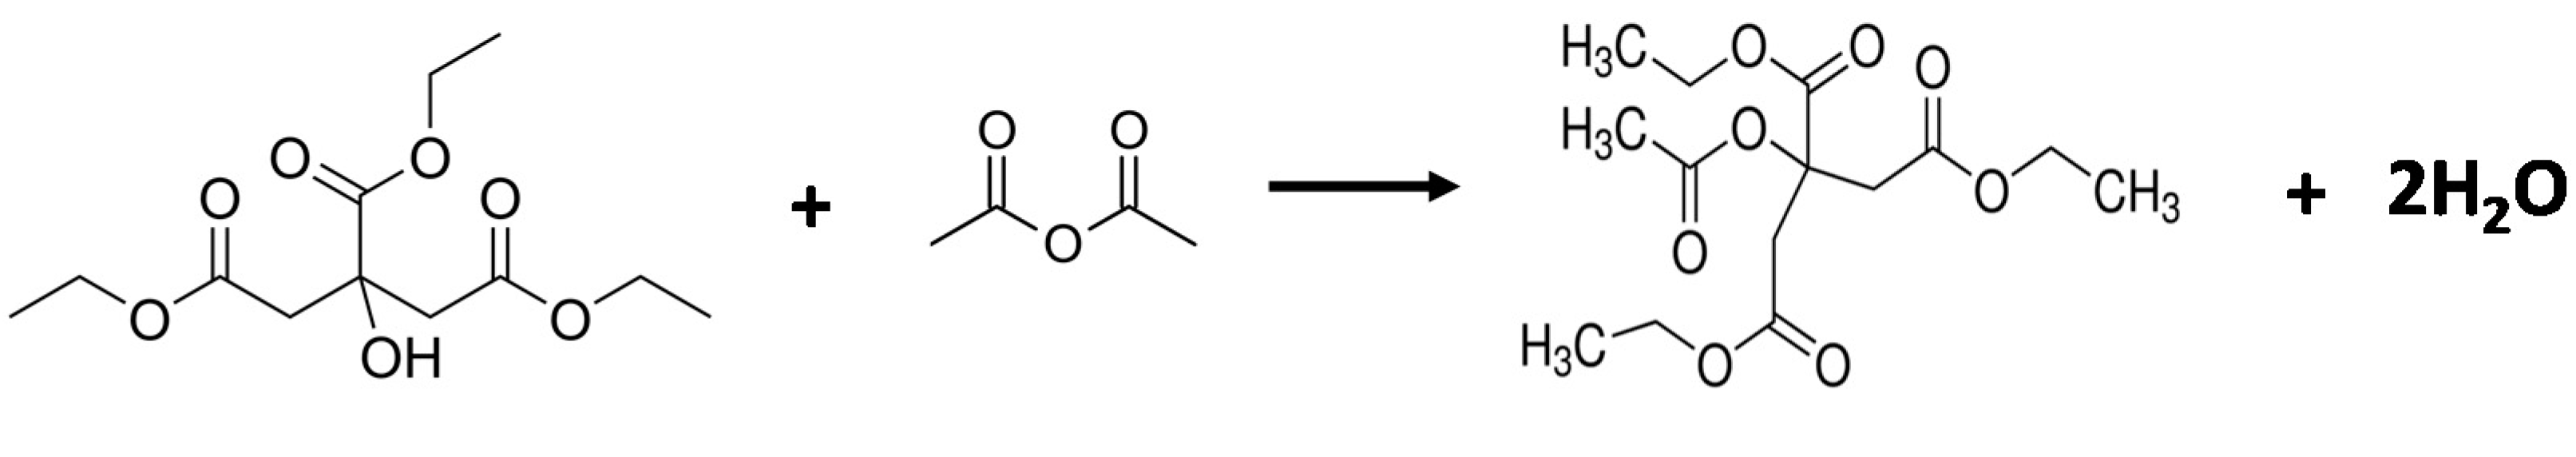 Acetyl Triethyl Citrate (ATEC) Production 